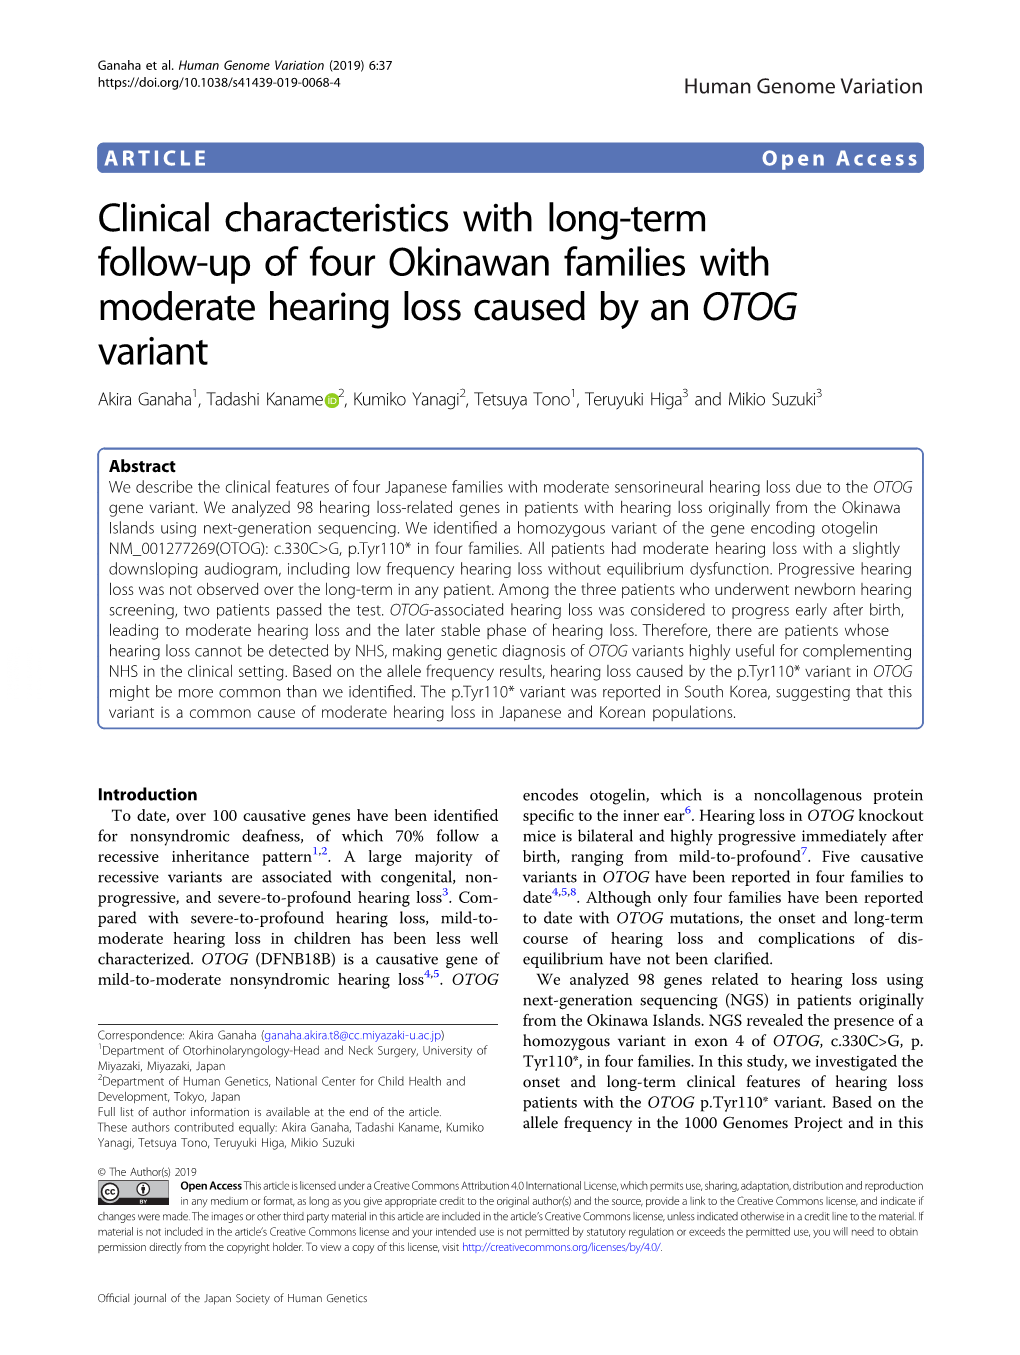 Clinical Characteristics with Long-Term Follow-Up of Four Okinawan Families